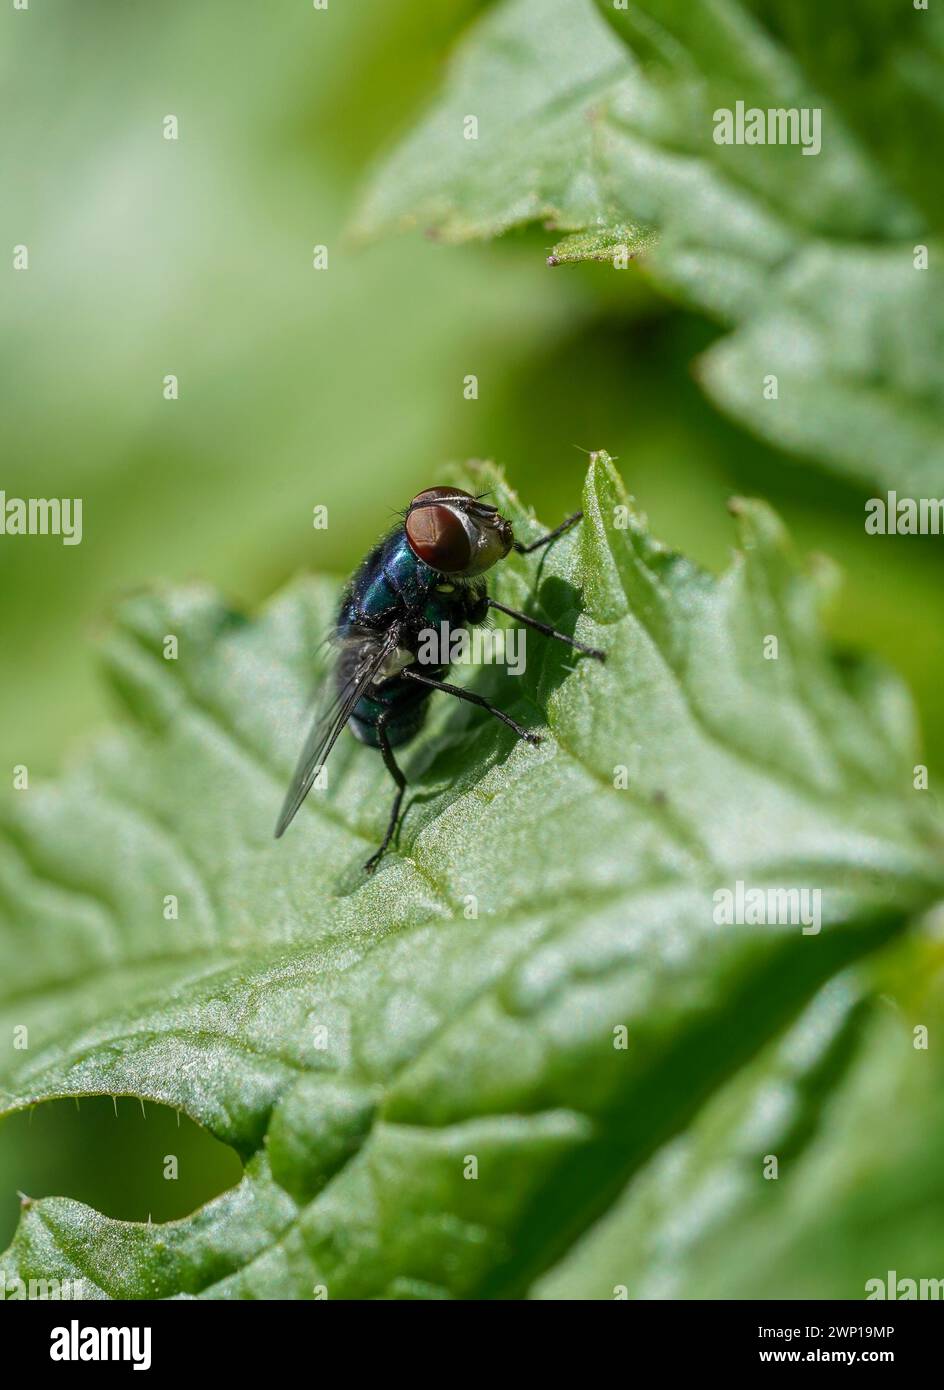 Common green bottle fly, Lucilia sericata on a leaf in spring, Spain. Stock Photo